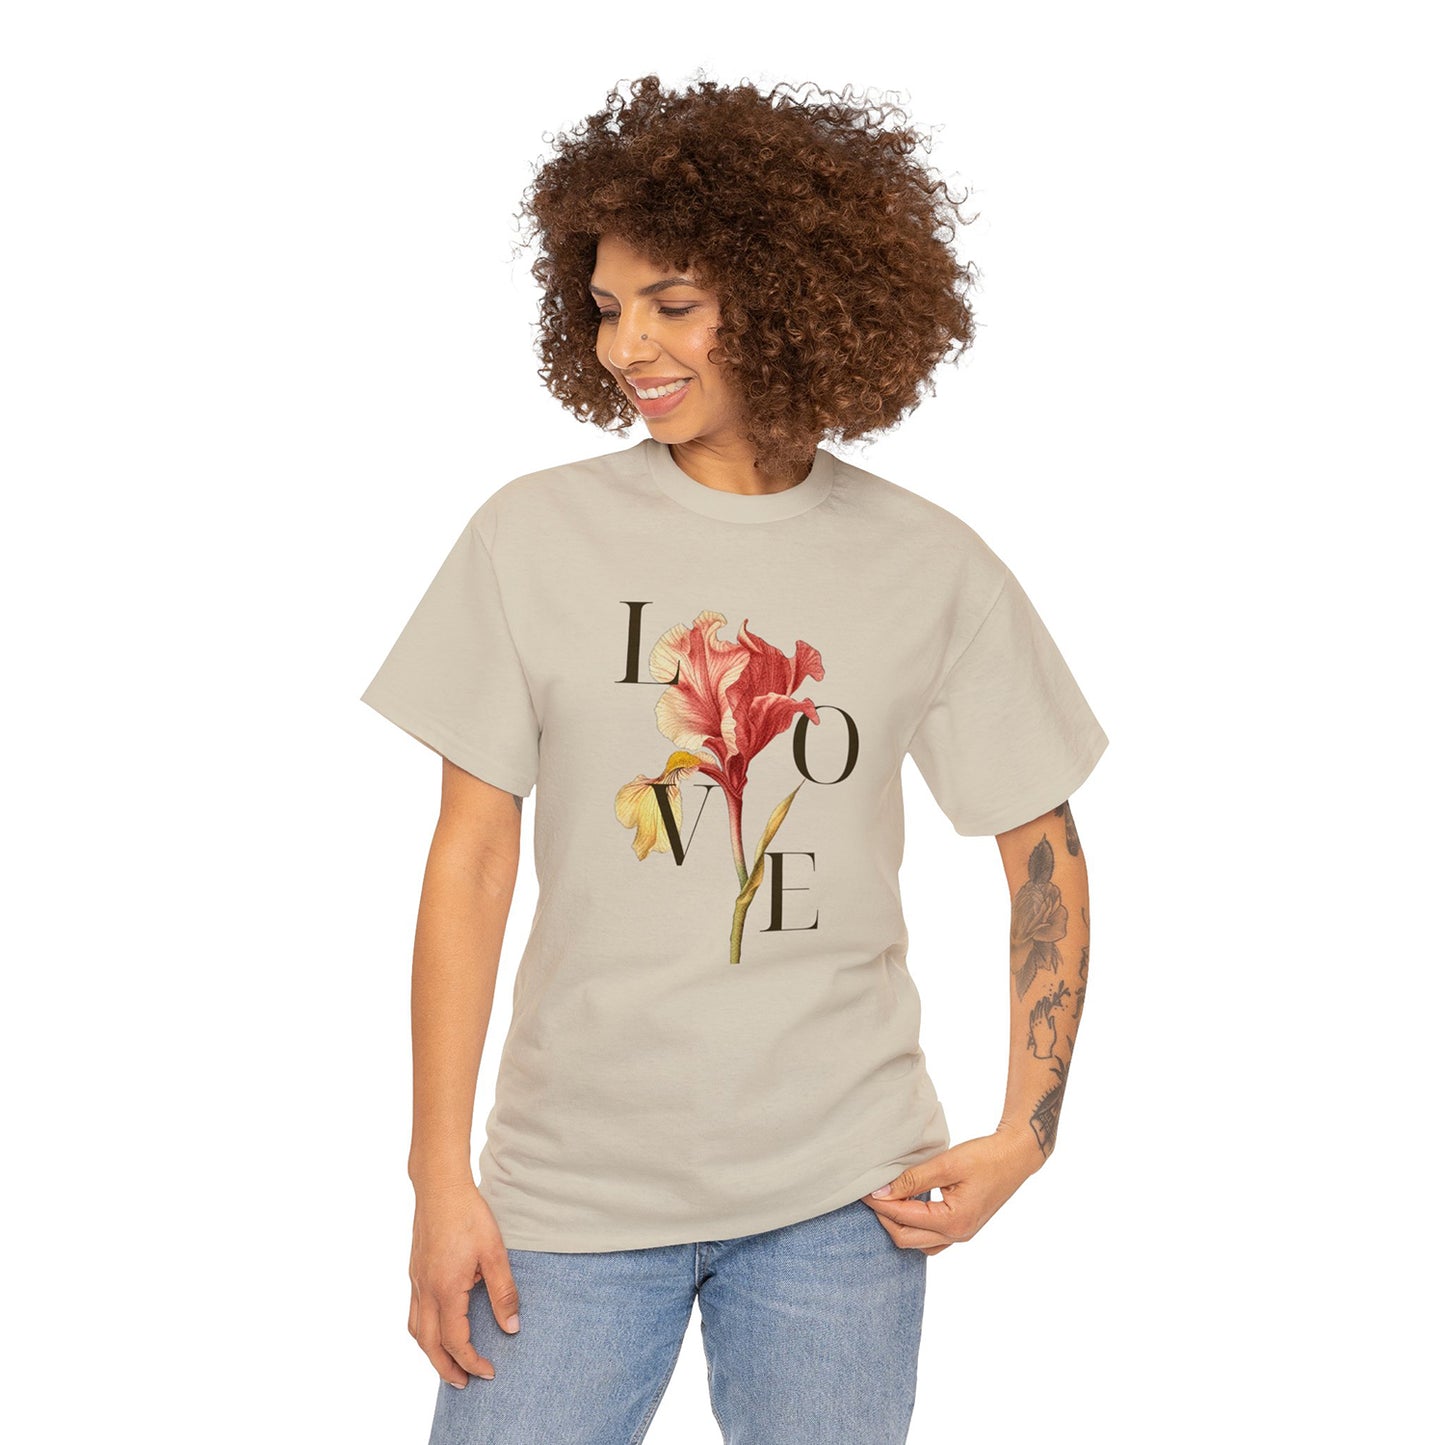 Women's Personalized Everyday Tee